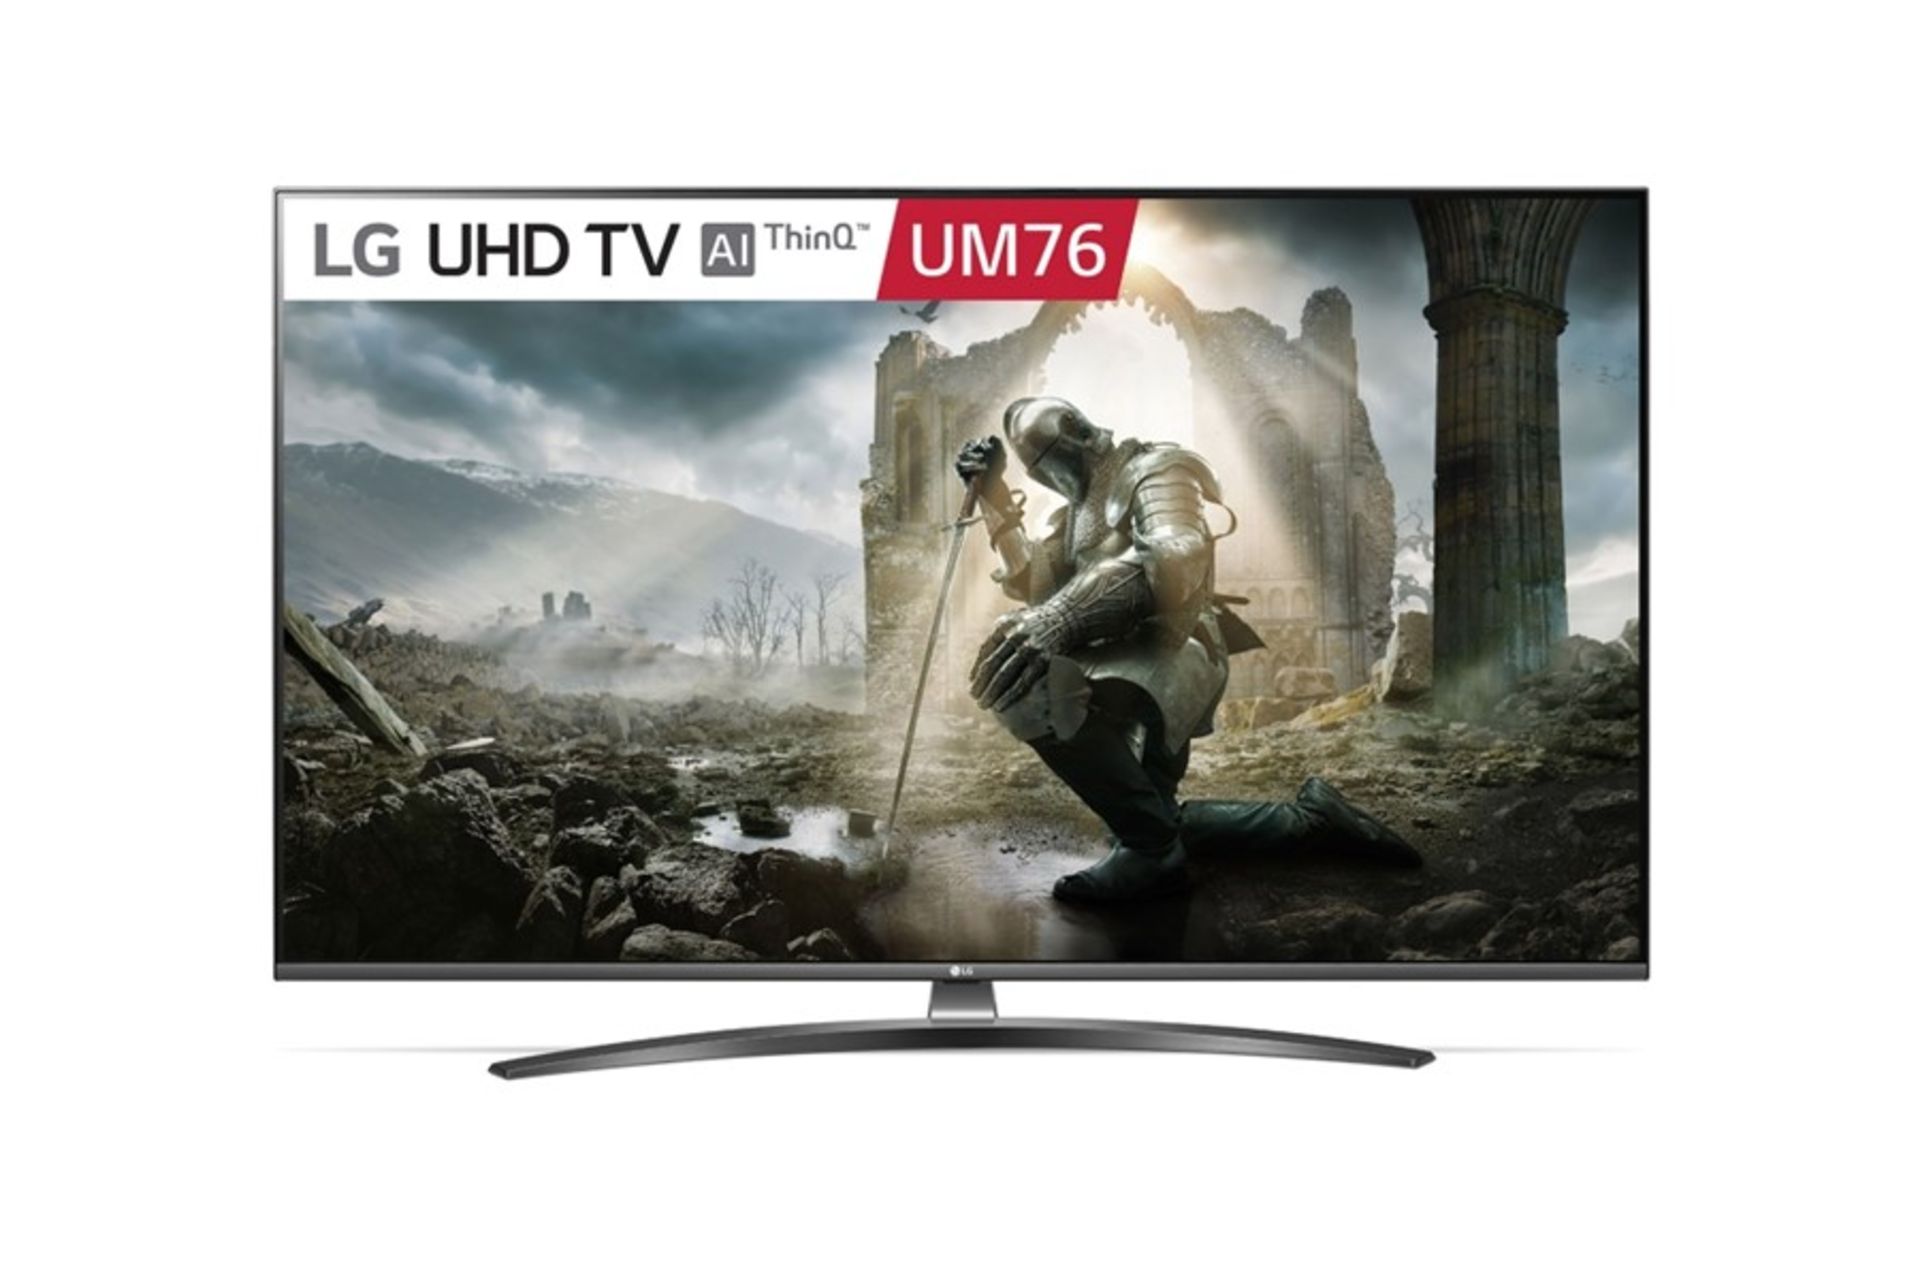 1 BOXED AND UNTESTED LG 55" UHD TV AI THINQ - 55UM74 / DAMAGES TO THE SCREEN / RRP £429.99 (PUBLIC